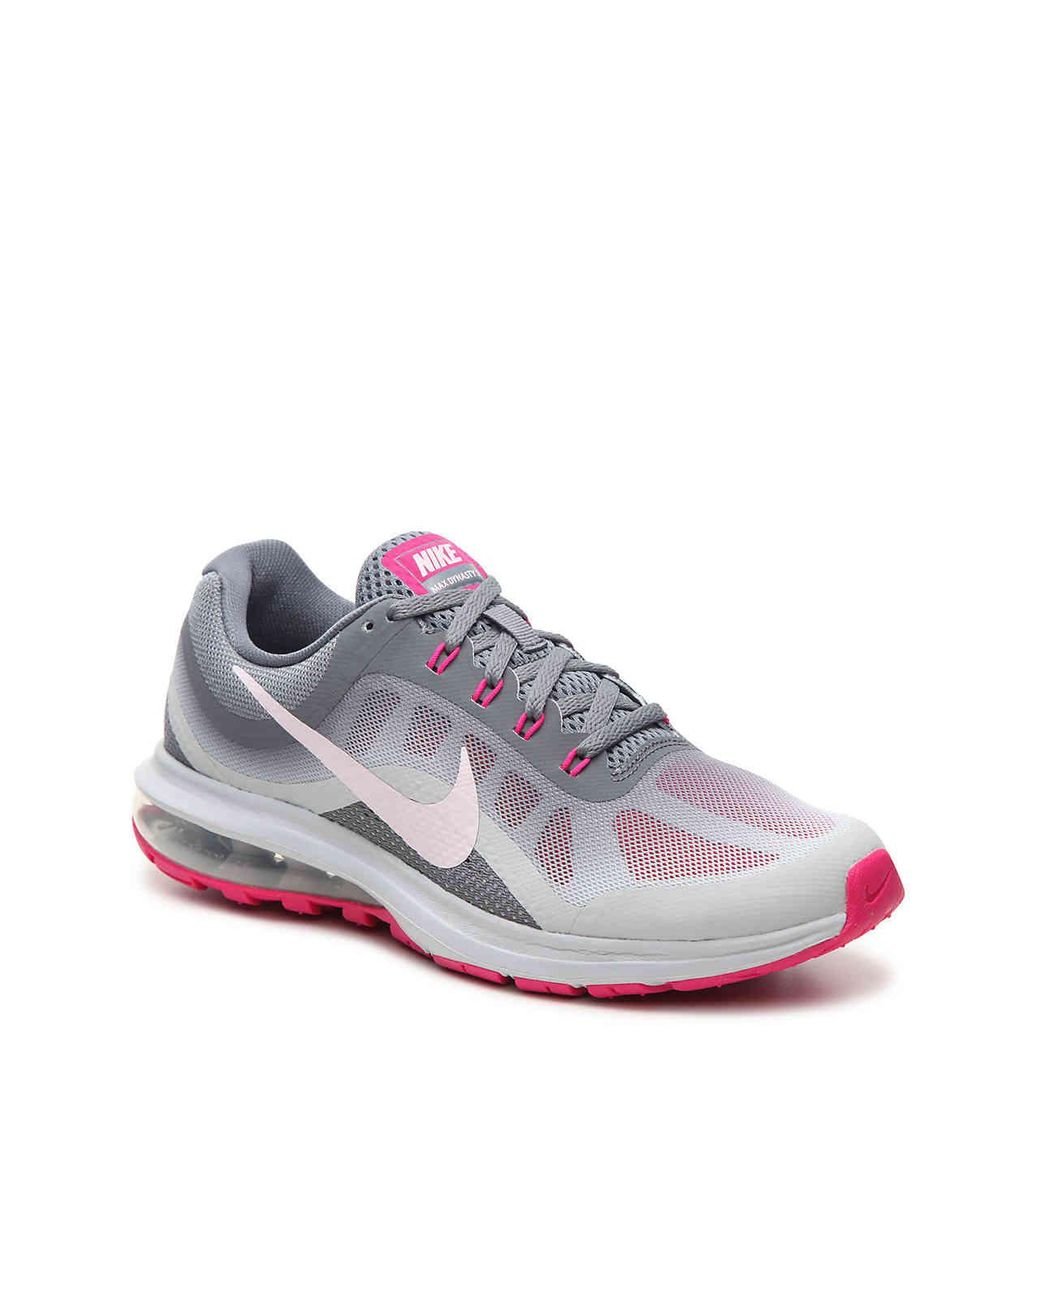 Nike Air Max Dynasty 2 Performance Running Shoe in Gray | Lyst